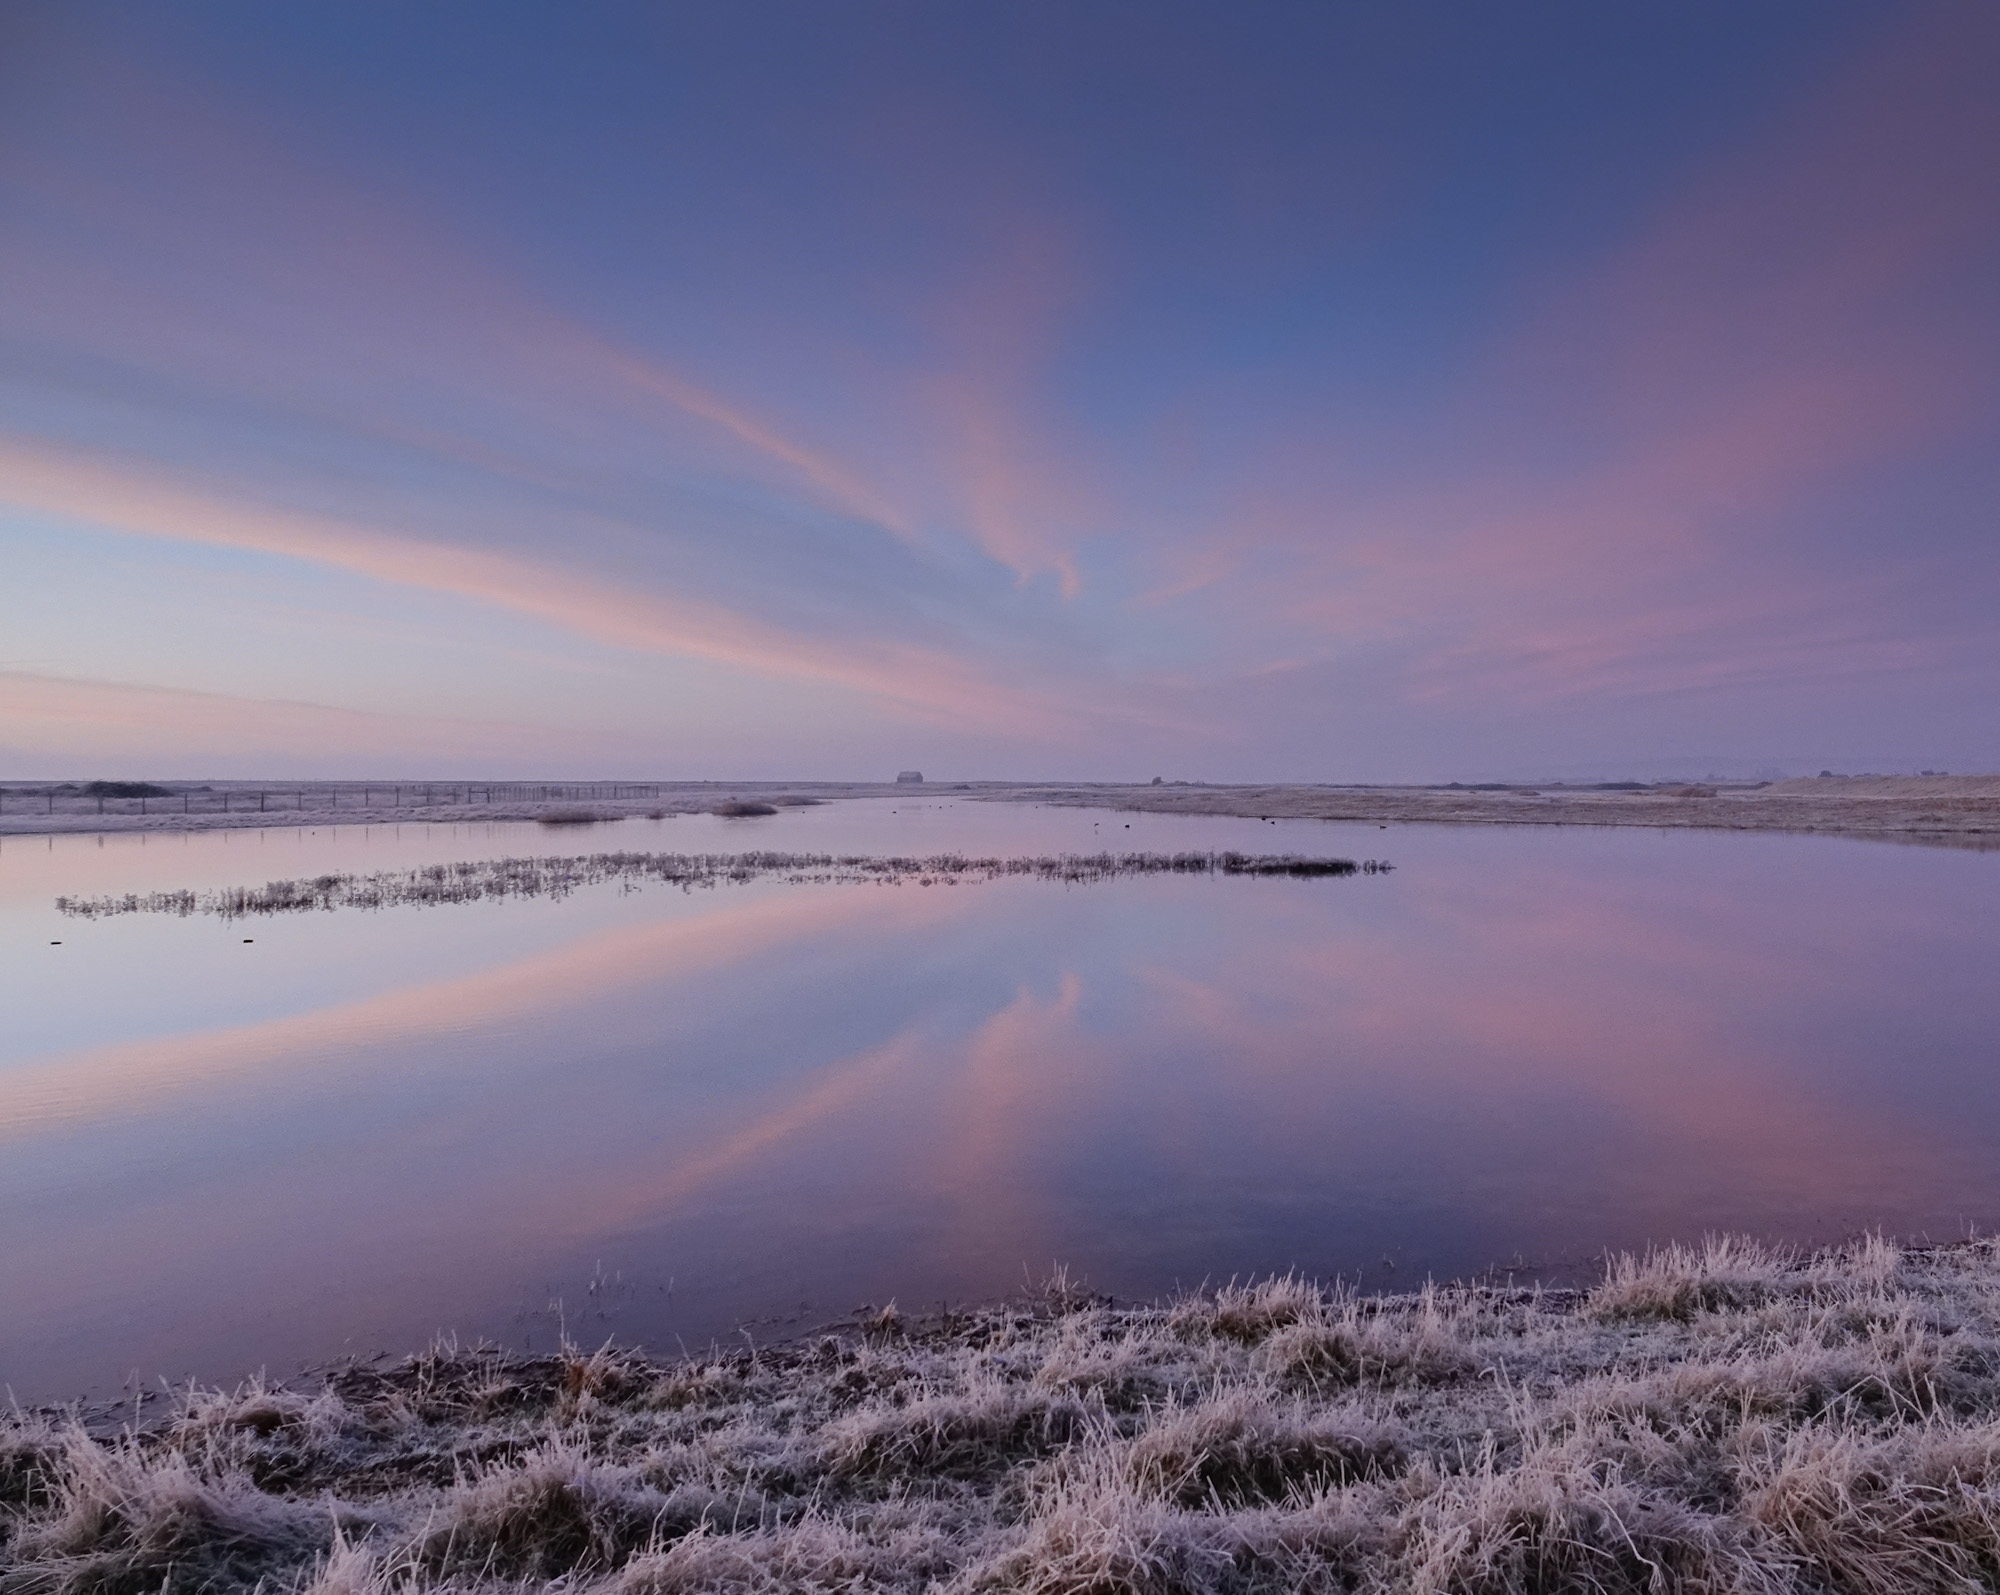 Sunrise at Rye Harbour Nature Reserve, East Sussex.